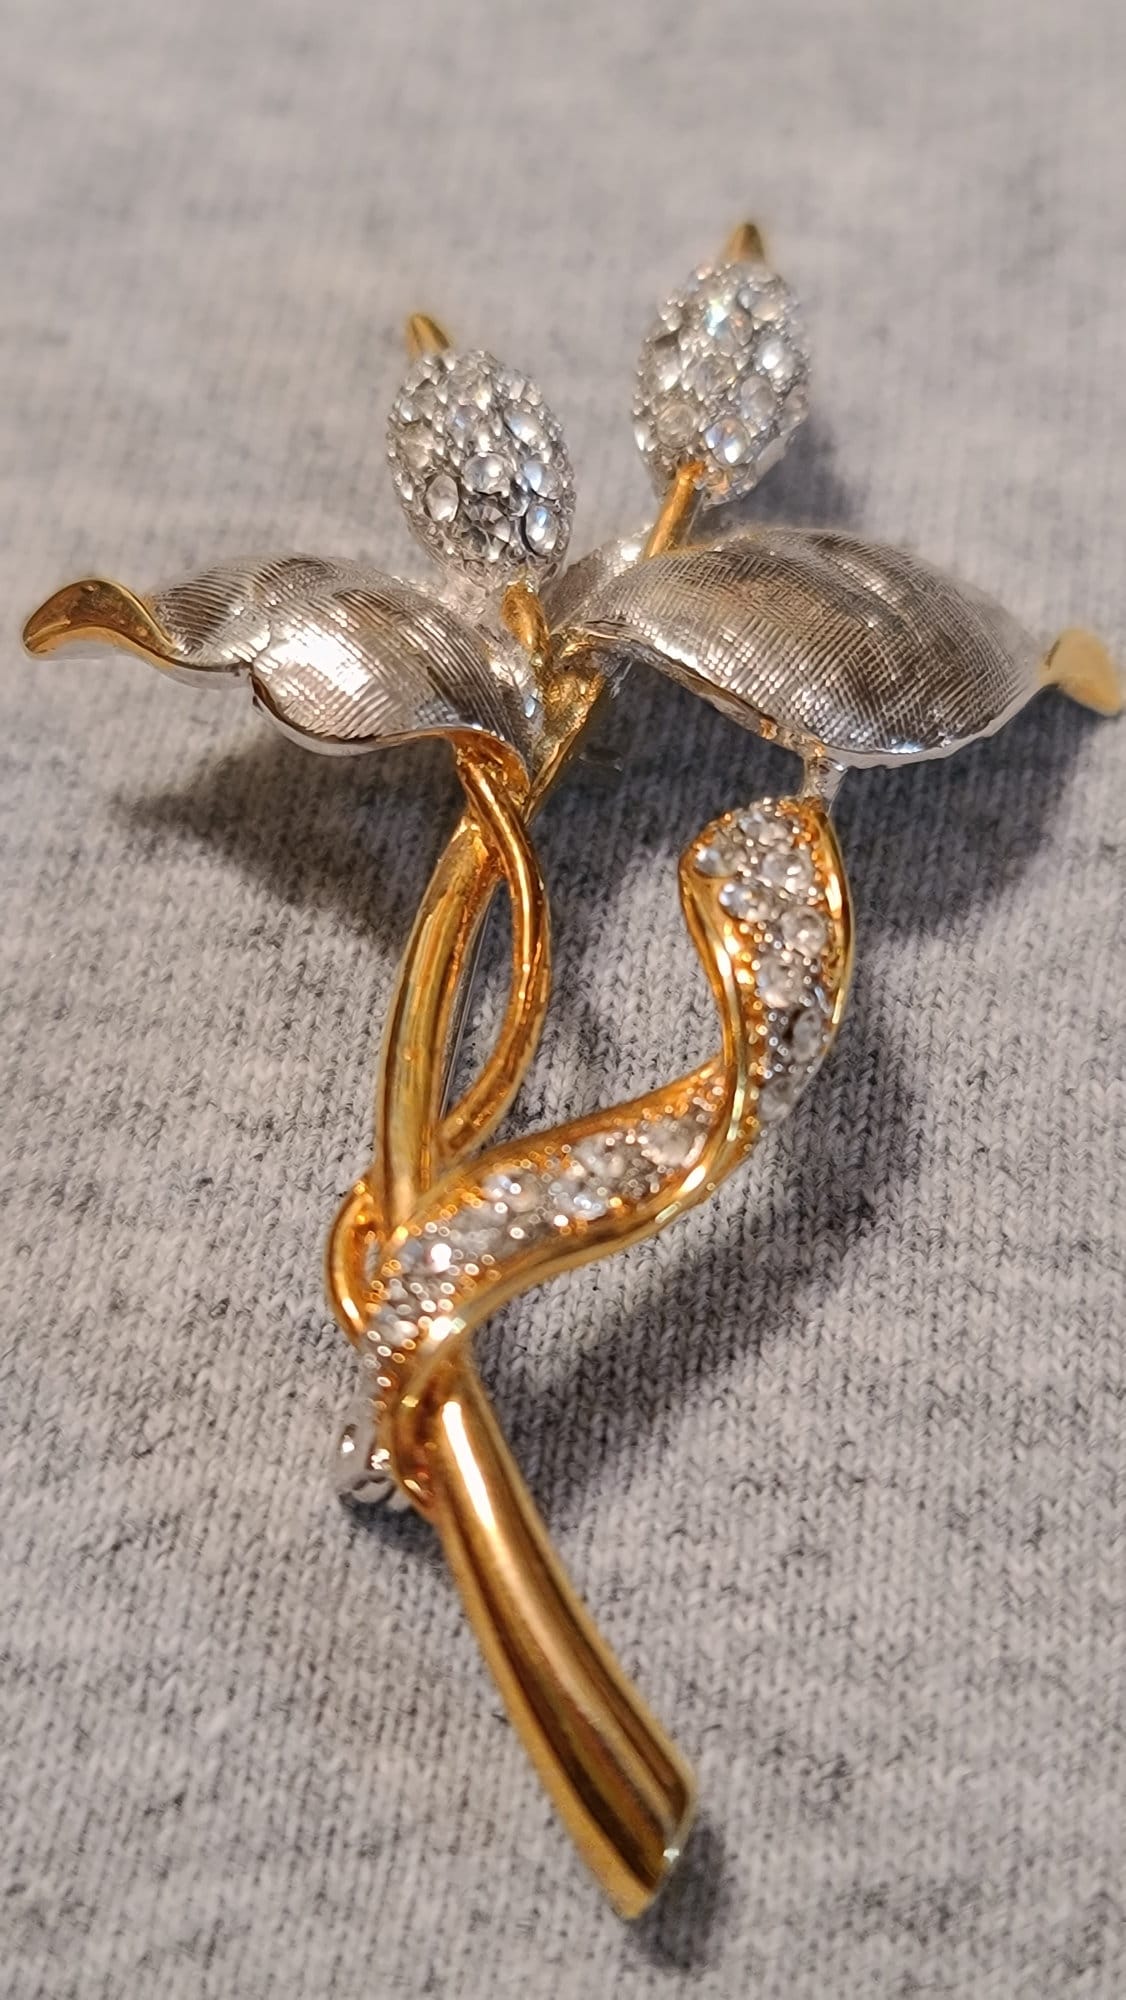 Very Rare Calla Lily Brooch From the Elizabeth Taylor White - Etsy